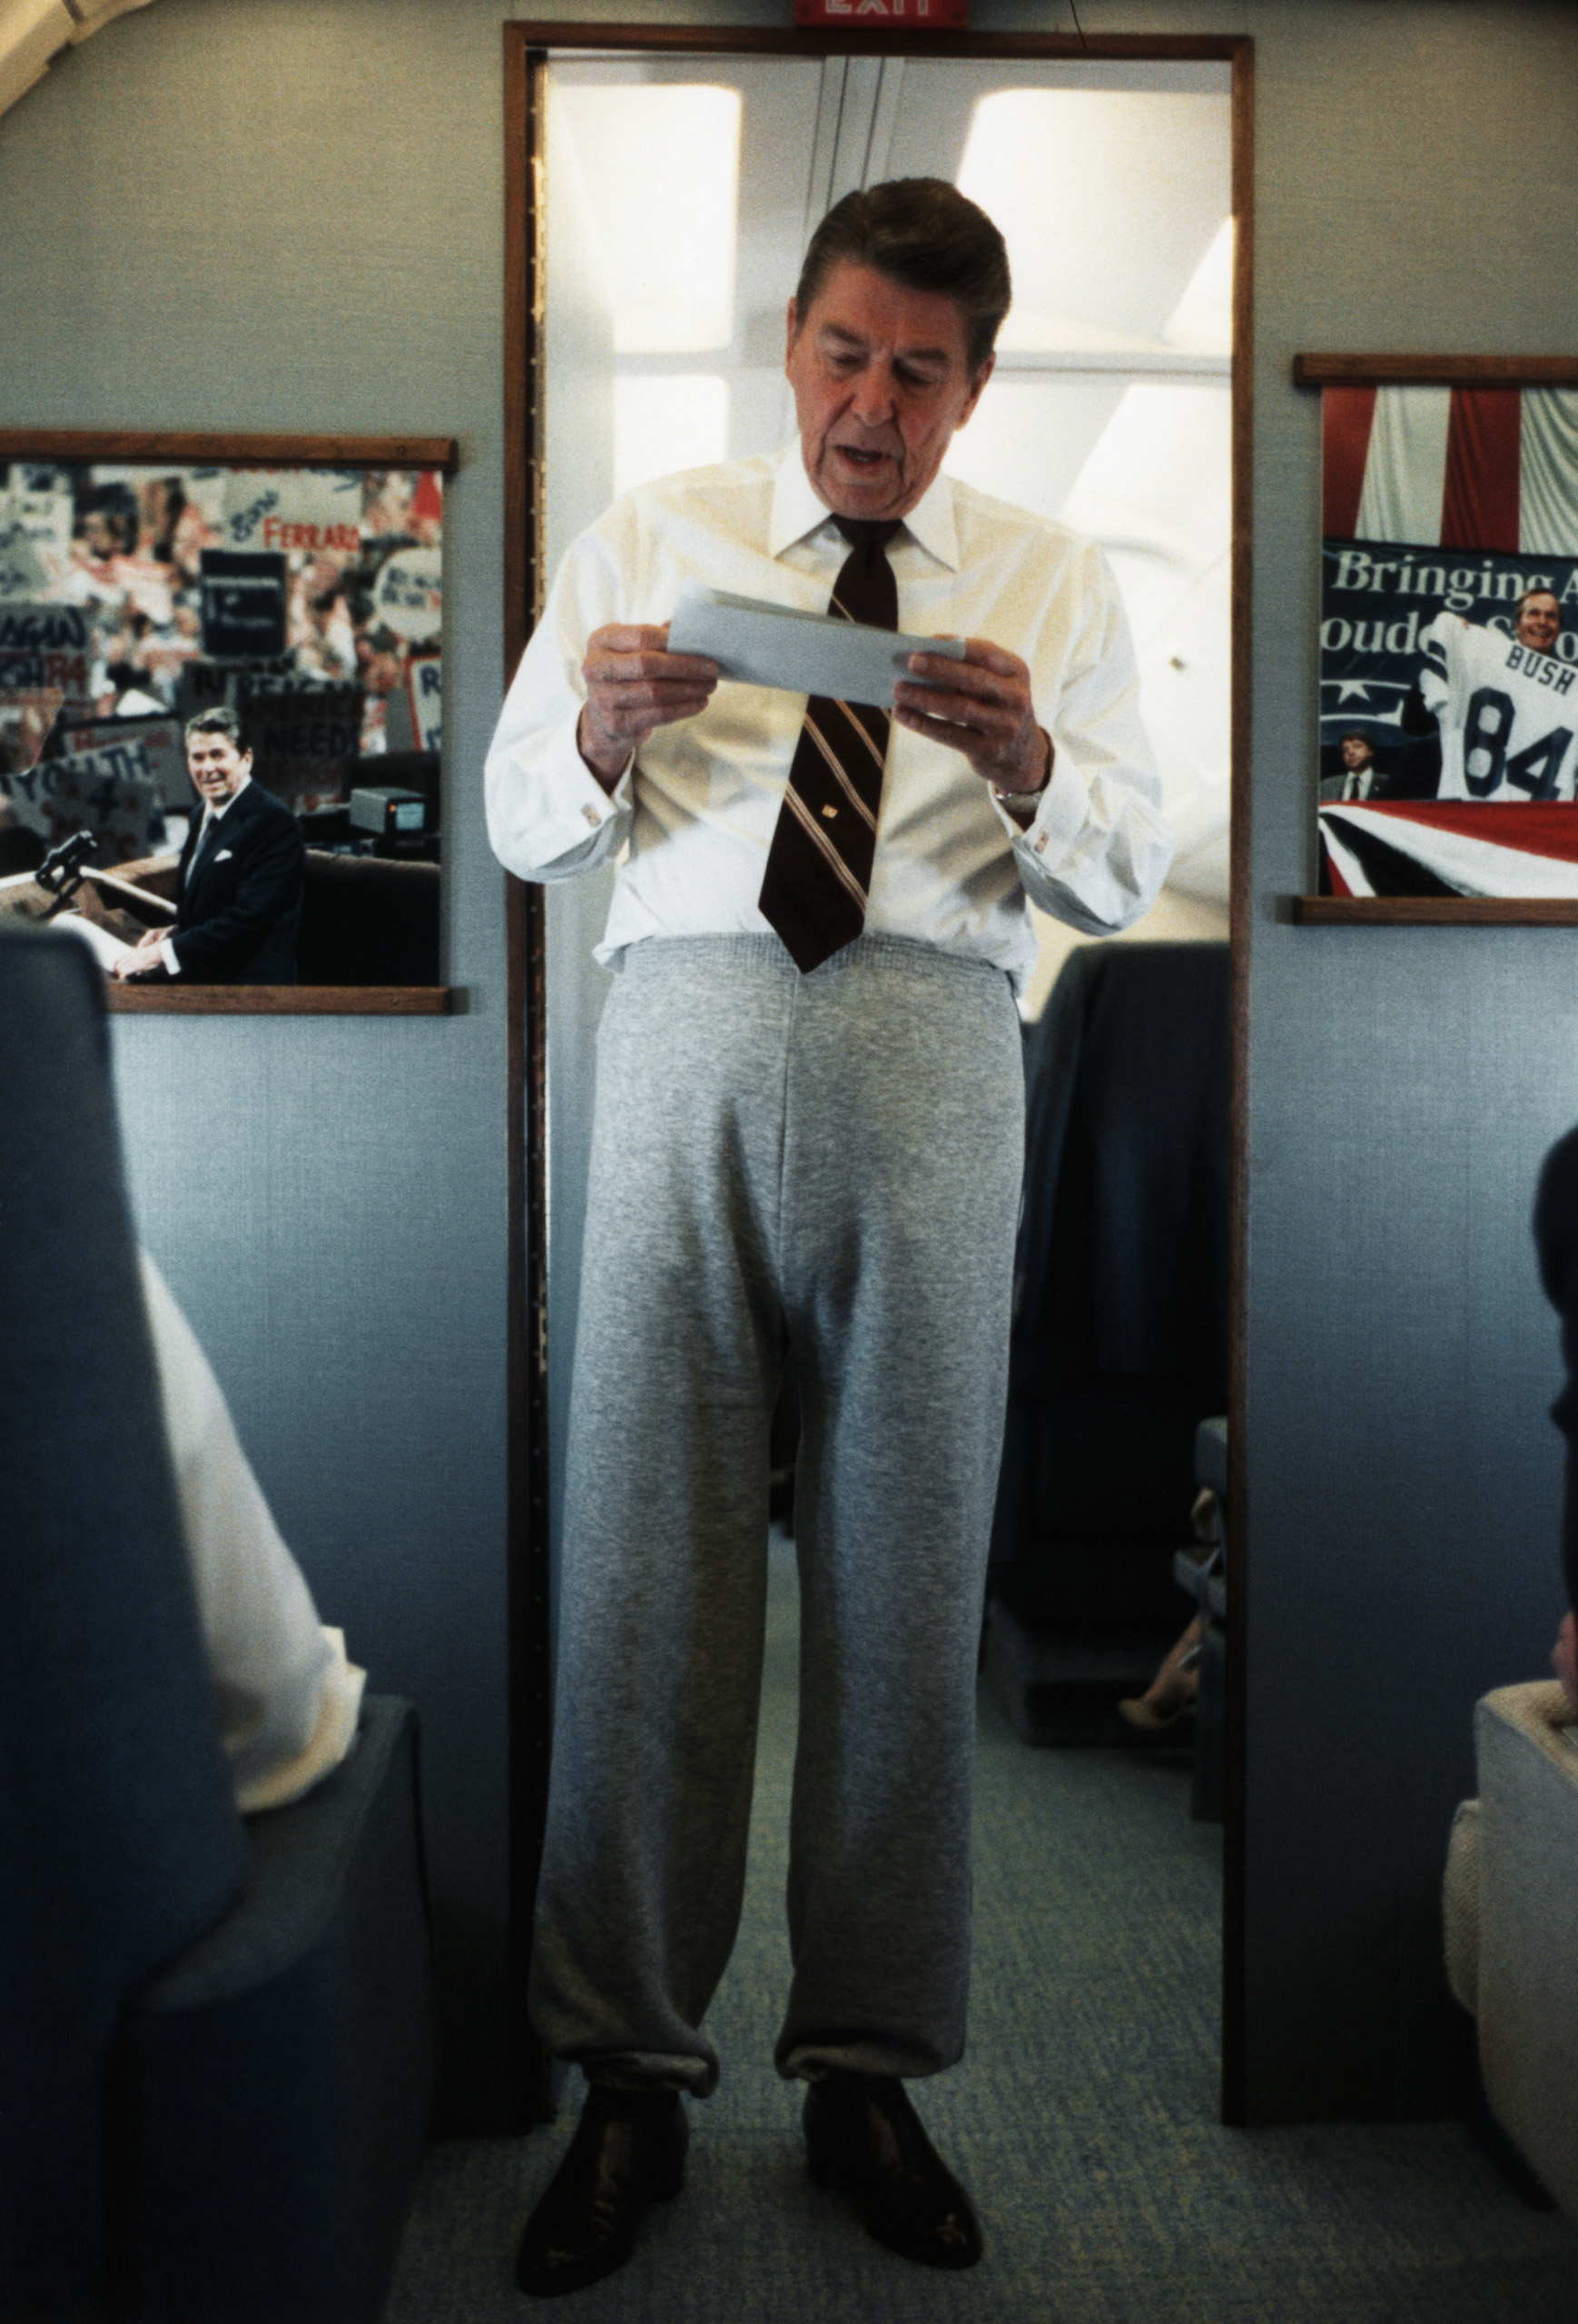 Ronald Reagan in Sweatpants and Tie